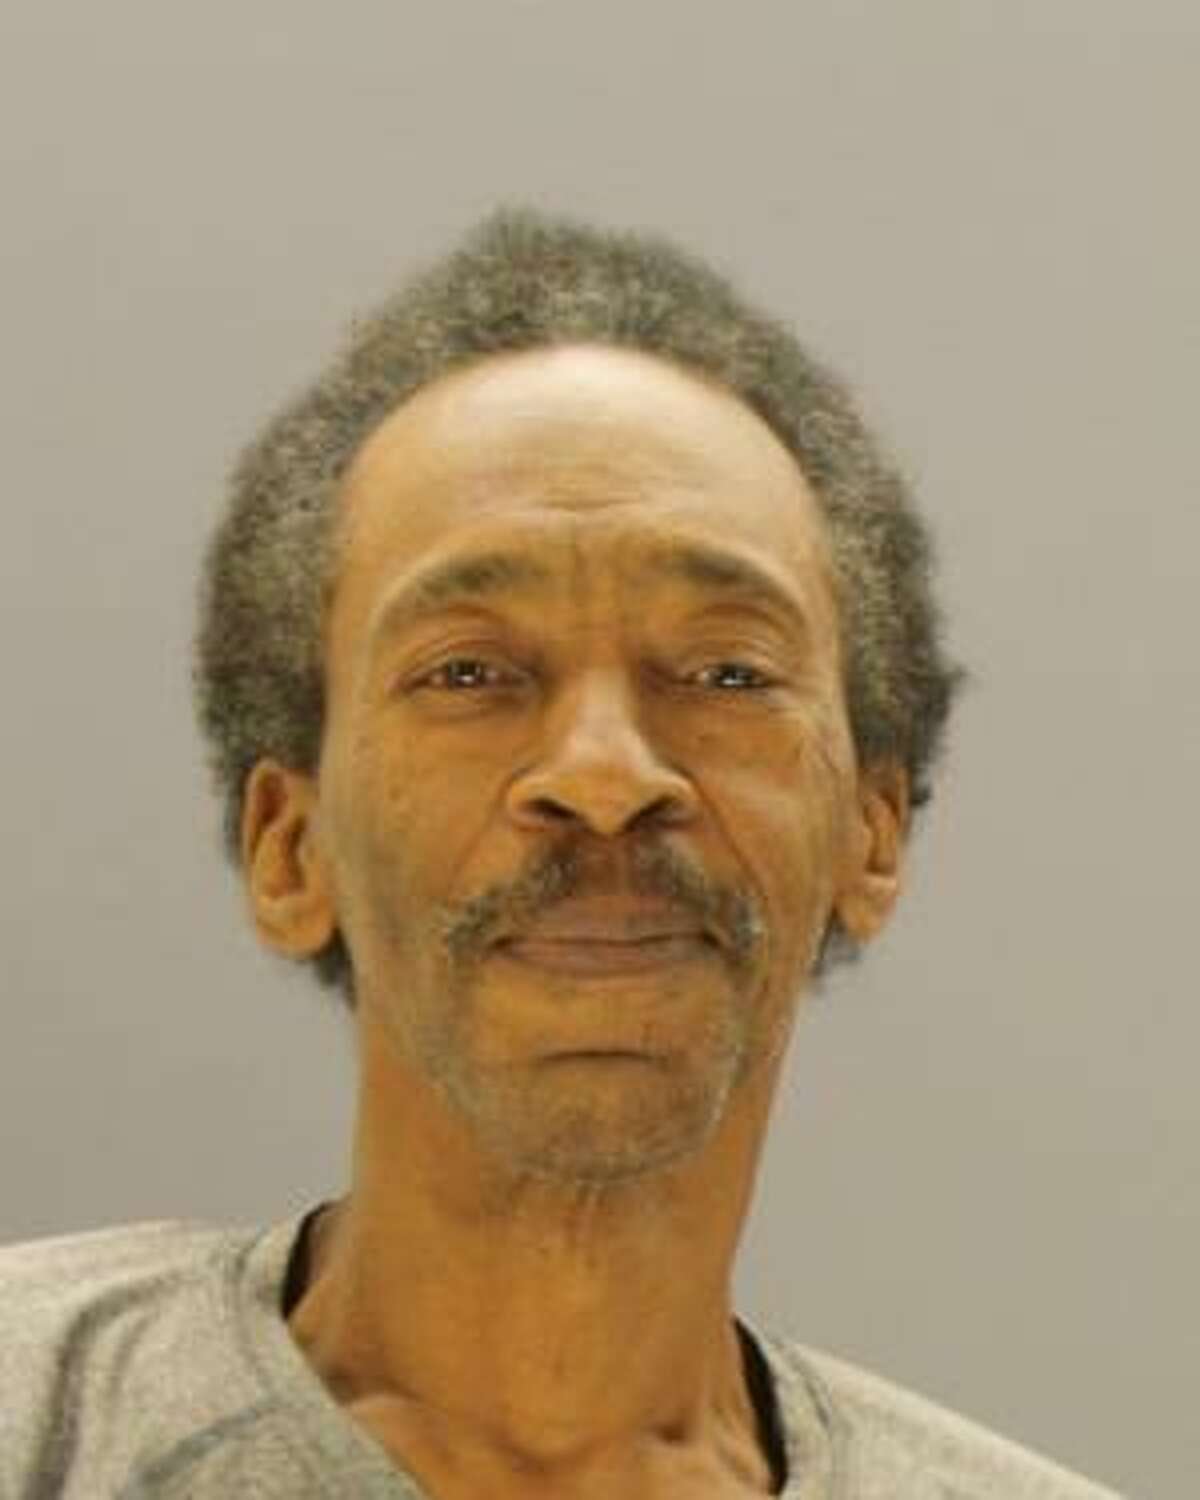 Otis Gardner, 64, was charged with animal cruelty for allegedly lighting a dog on fire.